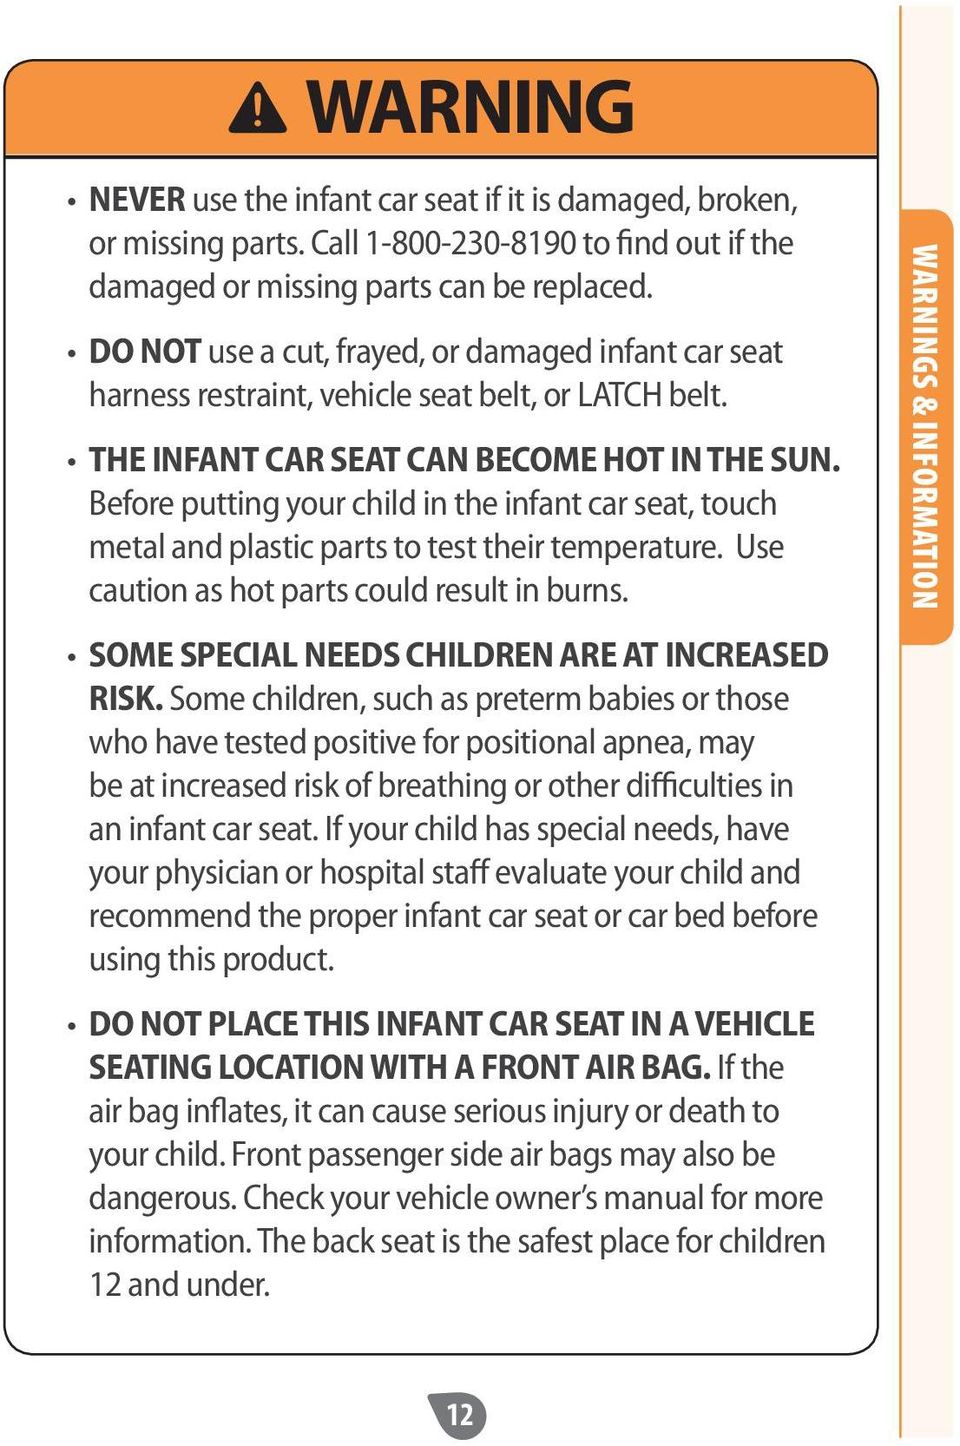 Before putting your child in the infant car seat, touch metal and plastic parts to test their temperature. Use caution as hot parts could result in burns.